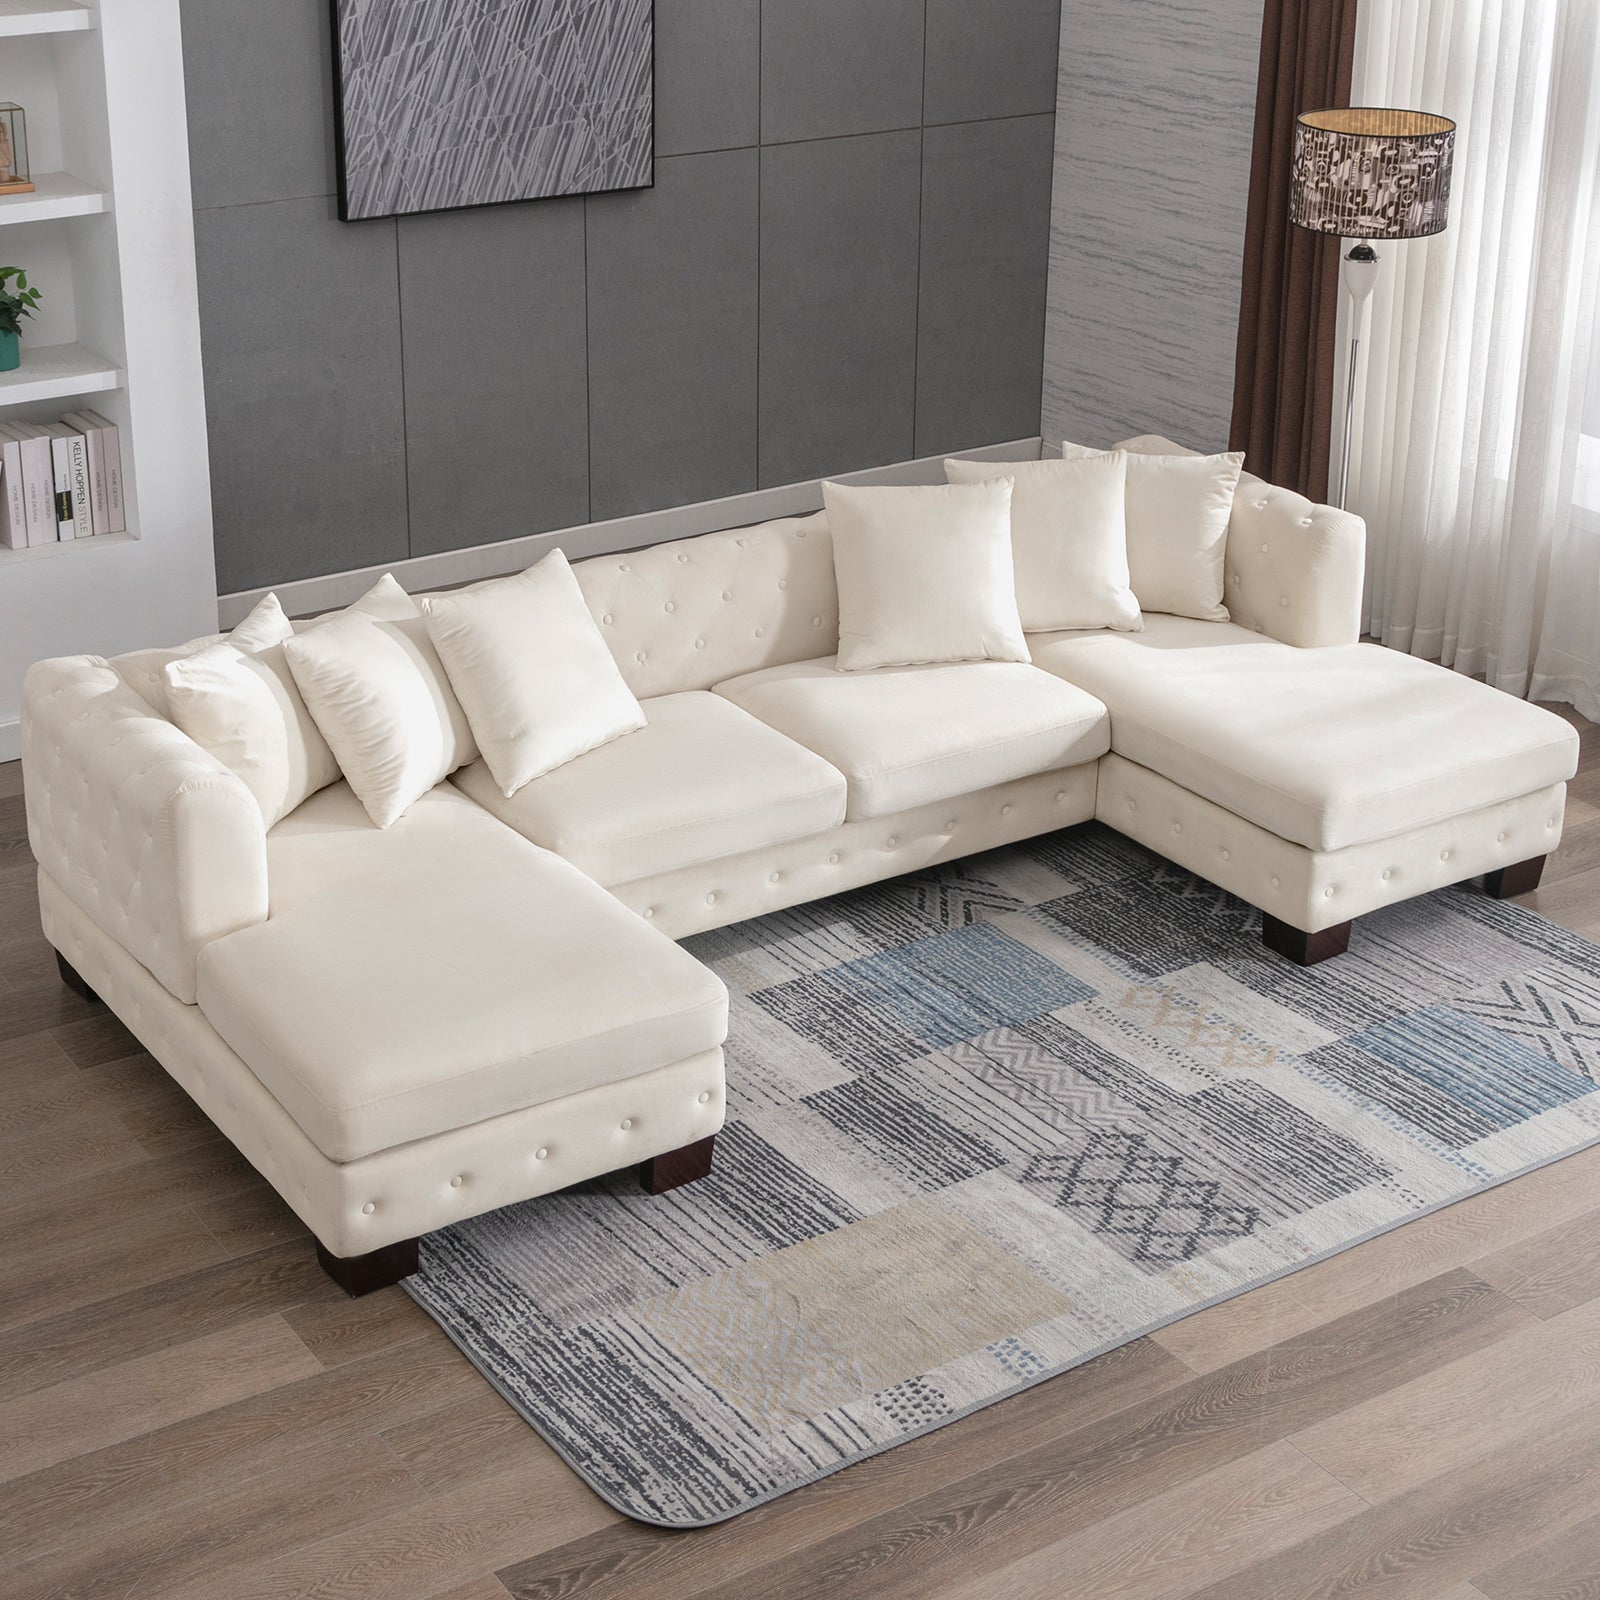 Cecer  U Shaped Upholstered Sectional Sofa with 6 Pillows